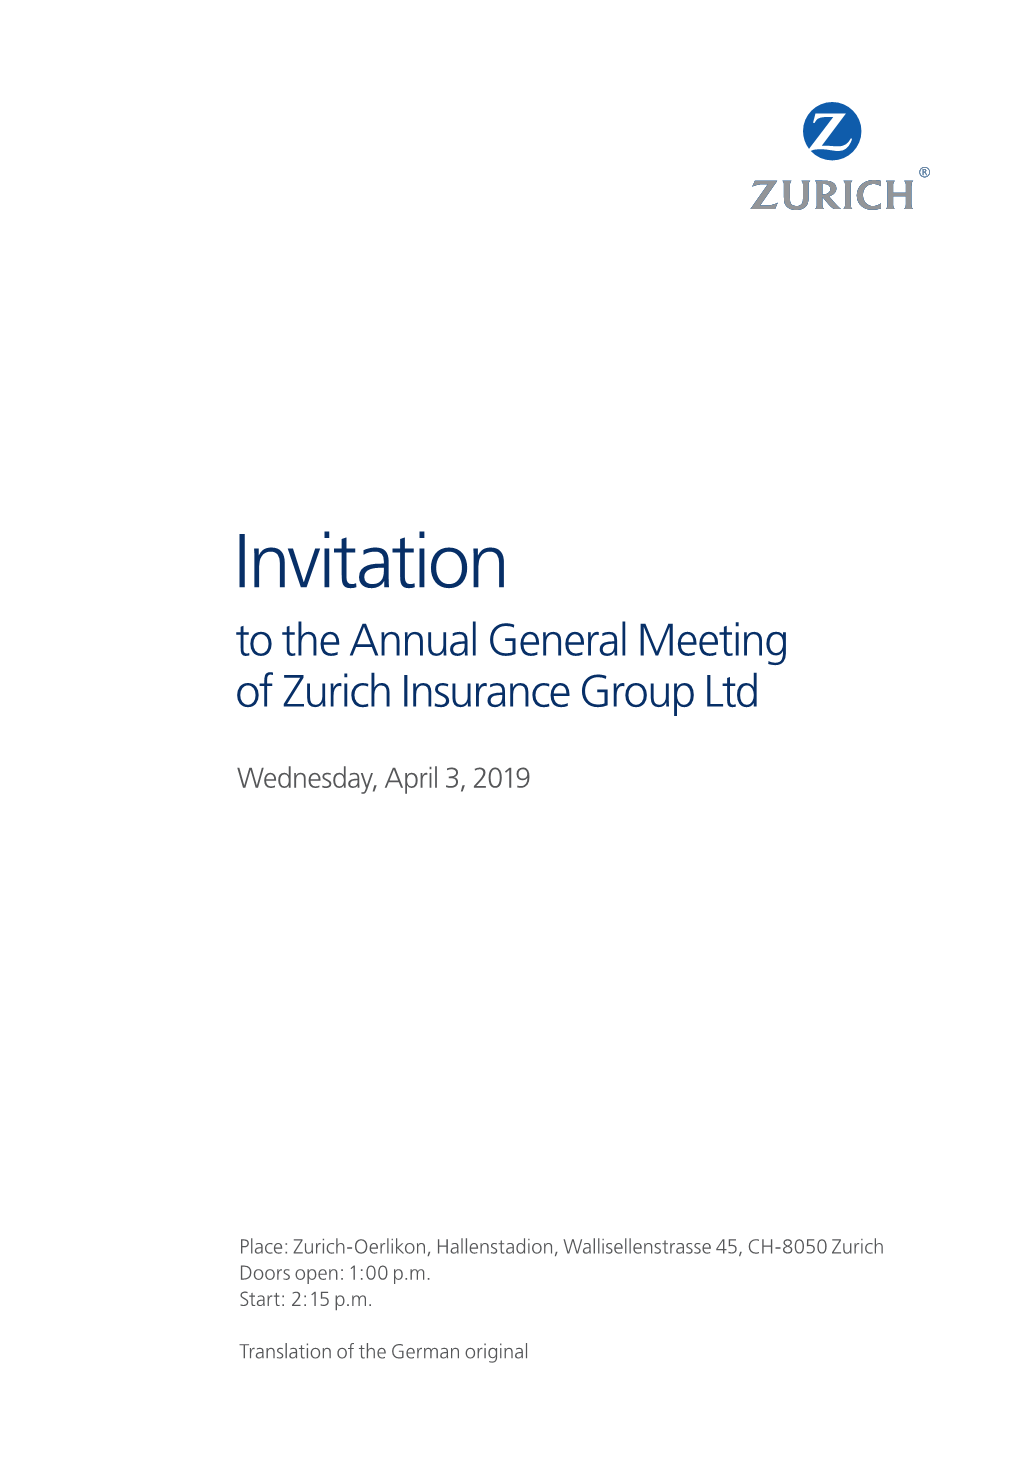 Invitation to Attend the Annual General Meeting of Zurich Insurance Group